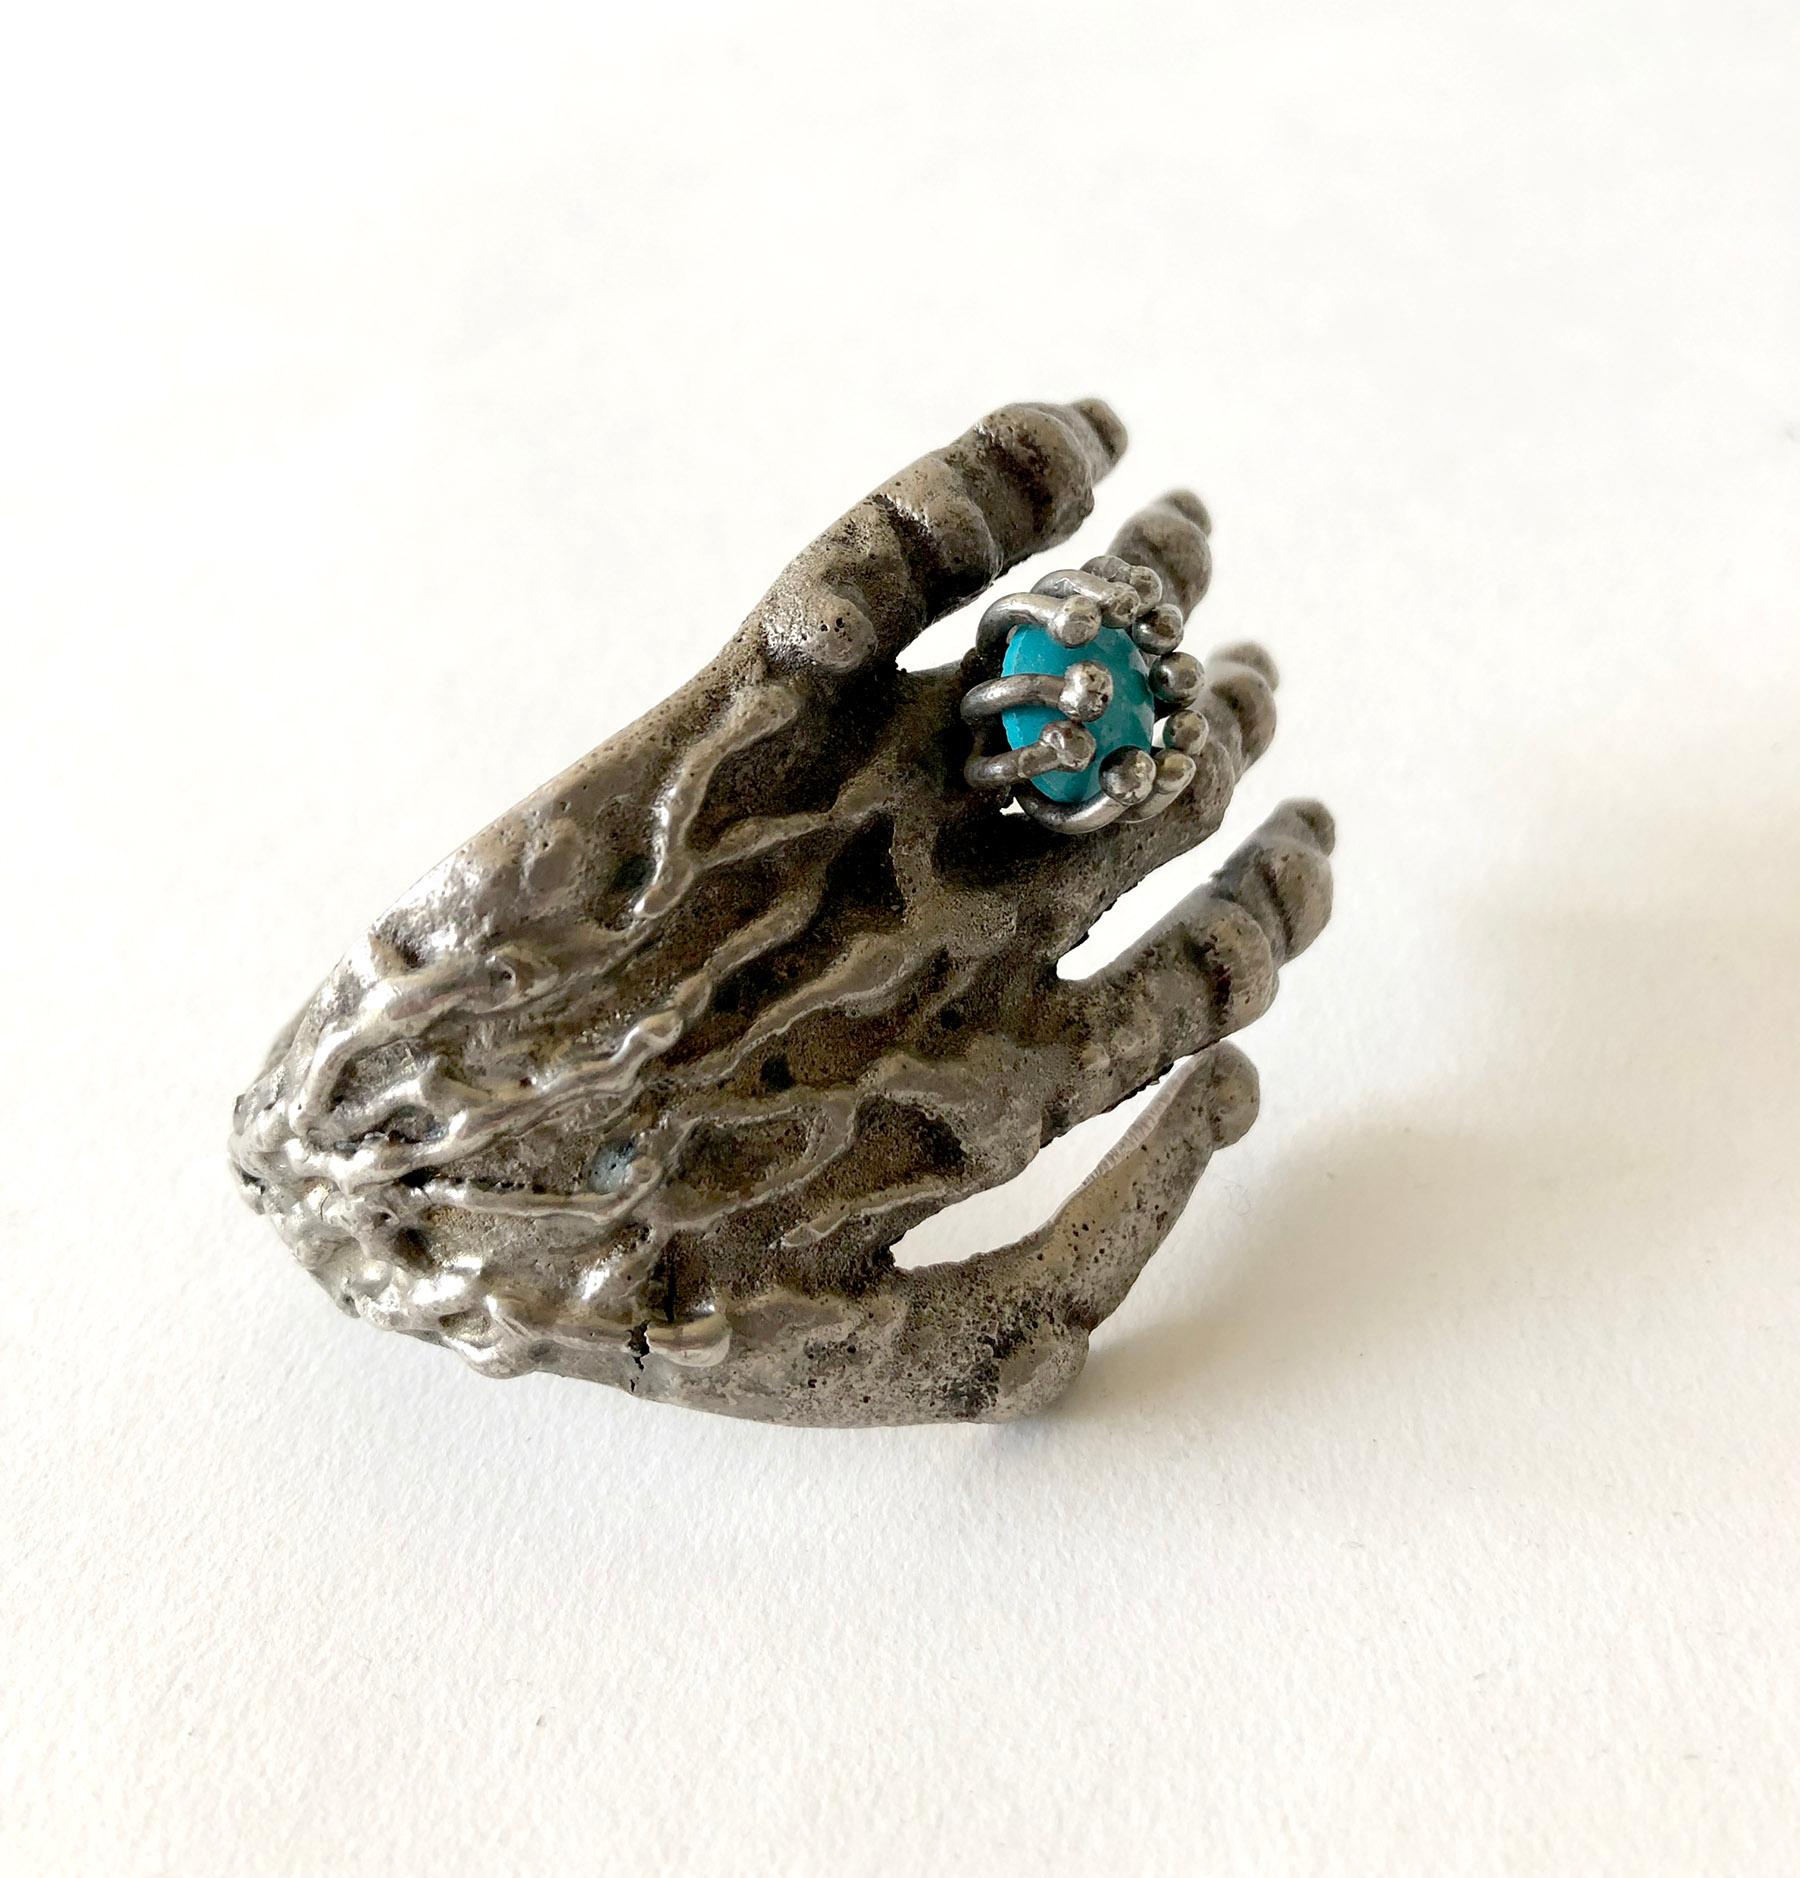 Artisan Pal Kepenyes Bronze Turquoise Mexican Surrealist Hand Cuff Bracelet